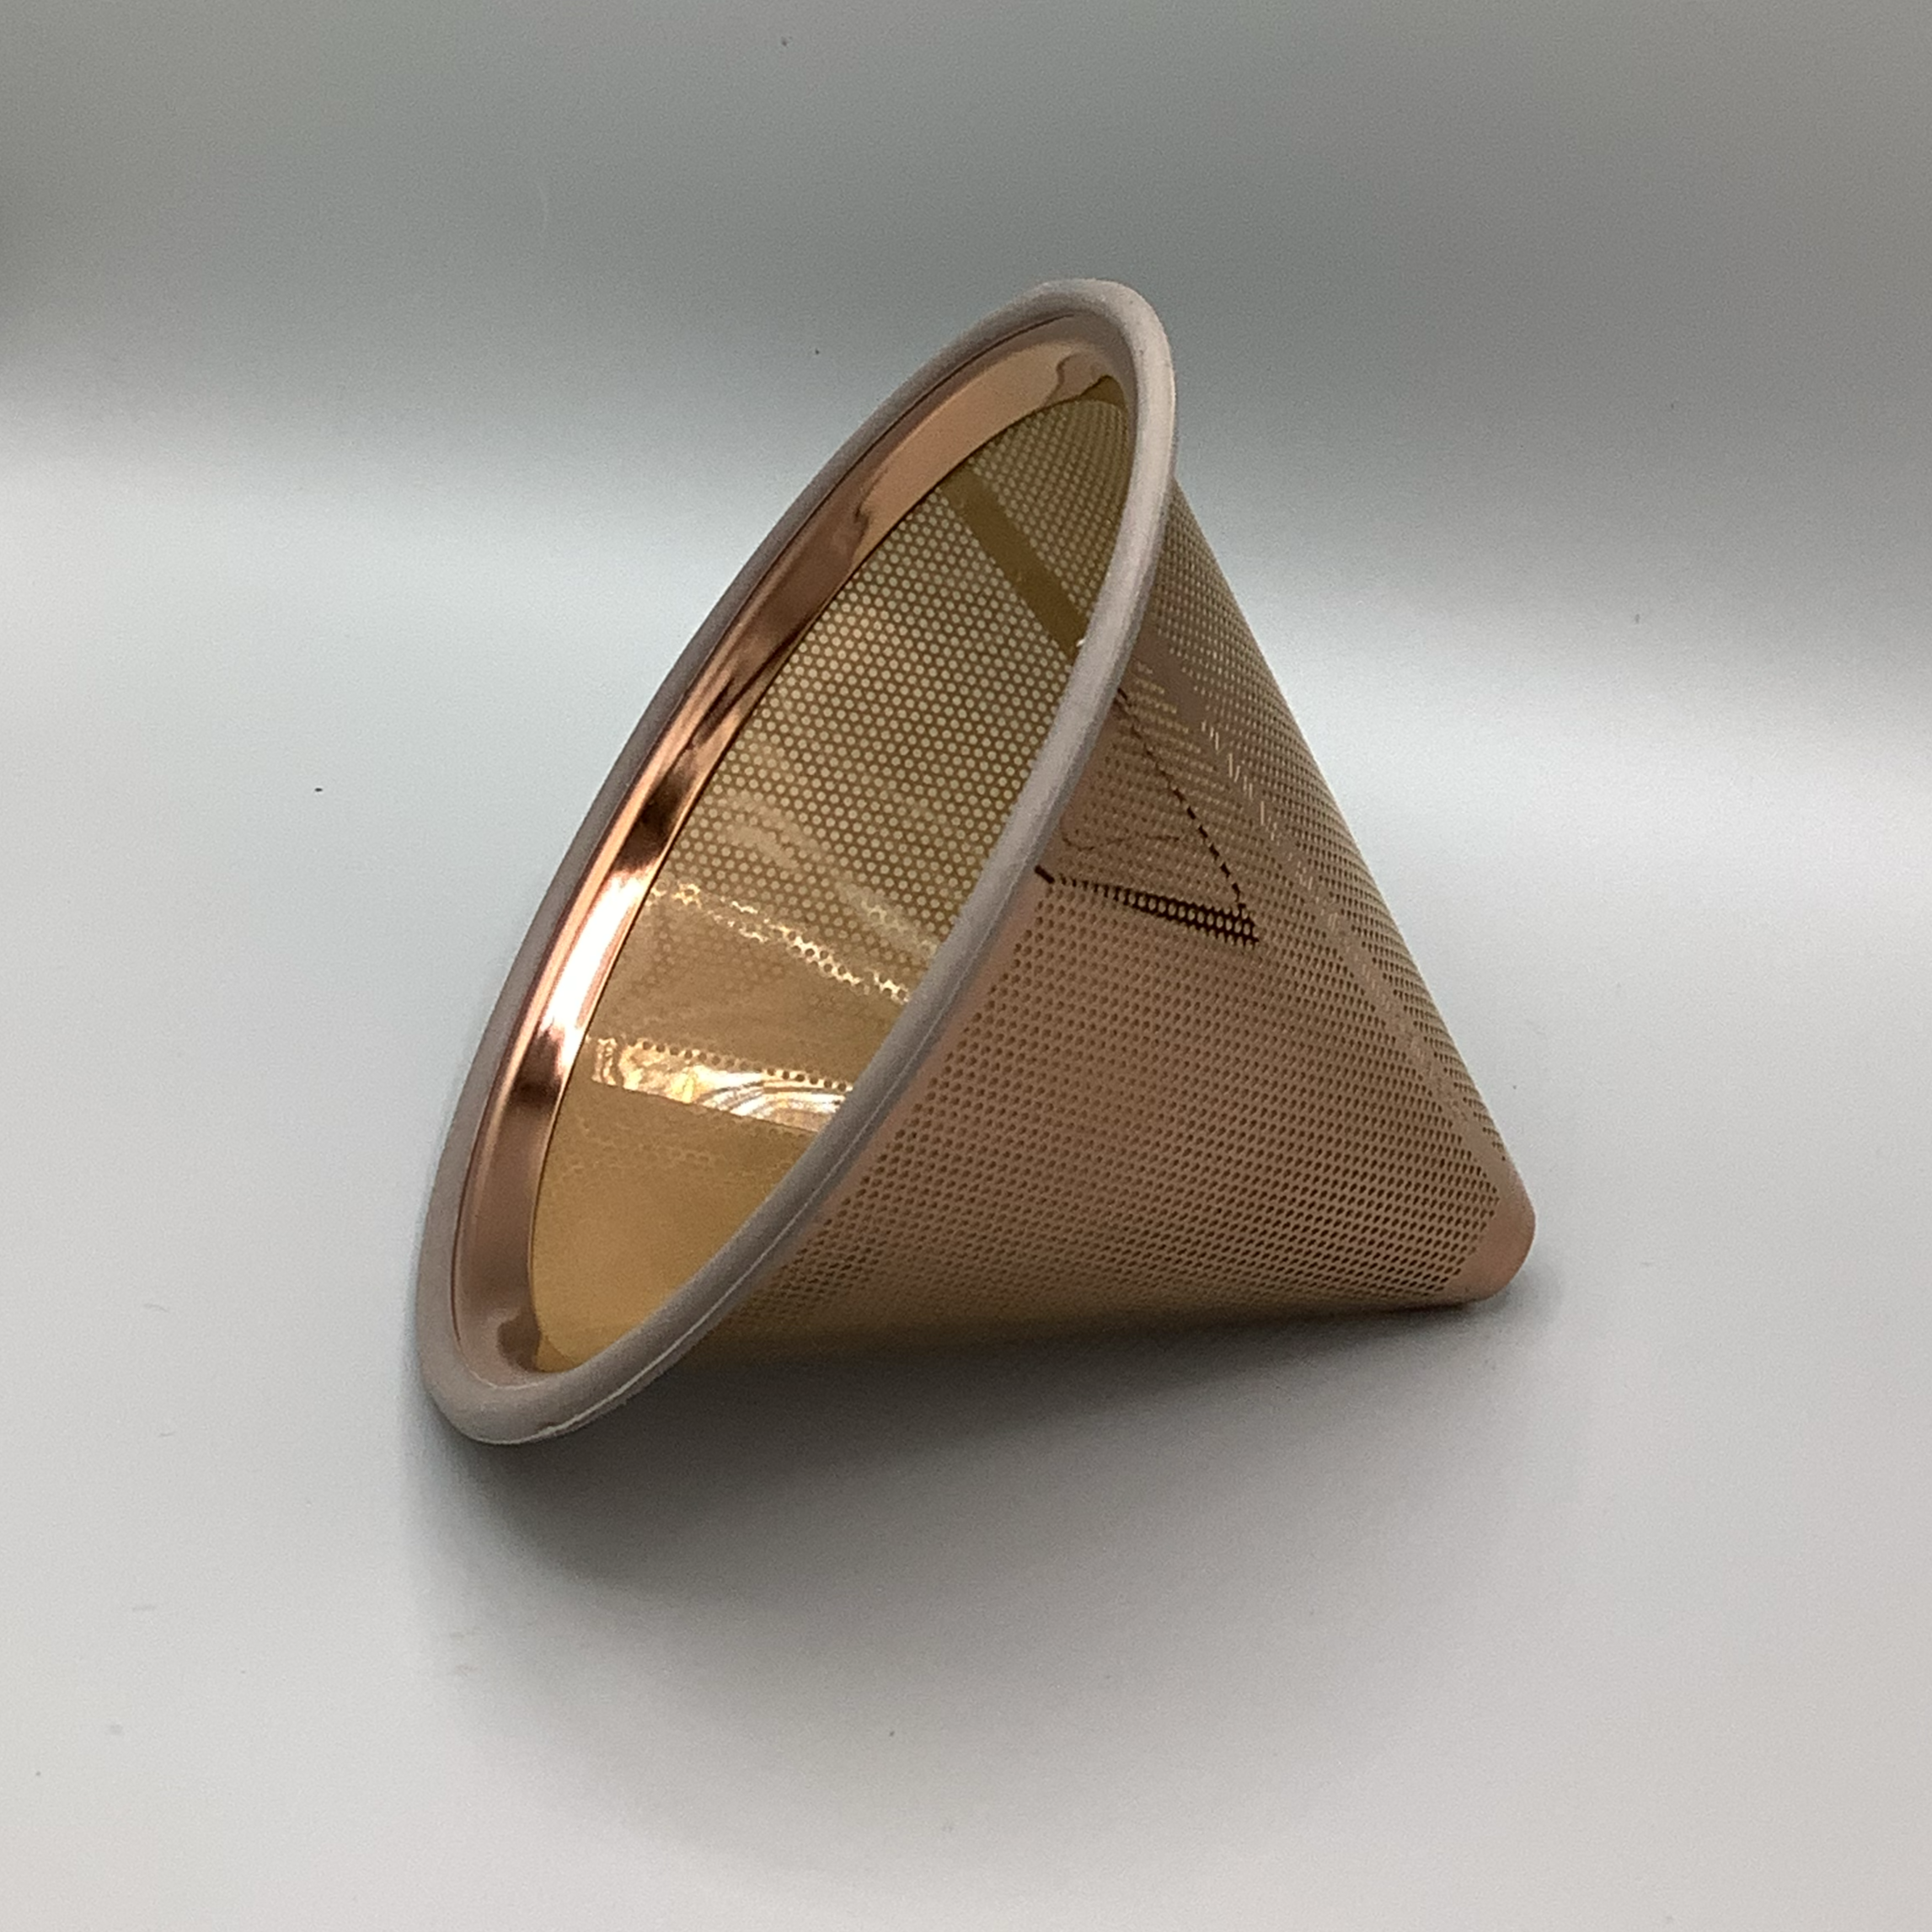 Reusable Pour Over Coffee Filter for Chemex and Hario V60 (Copper